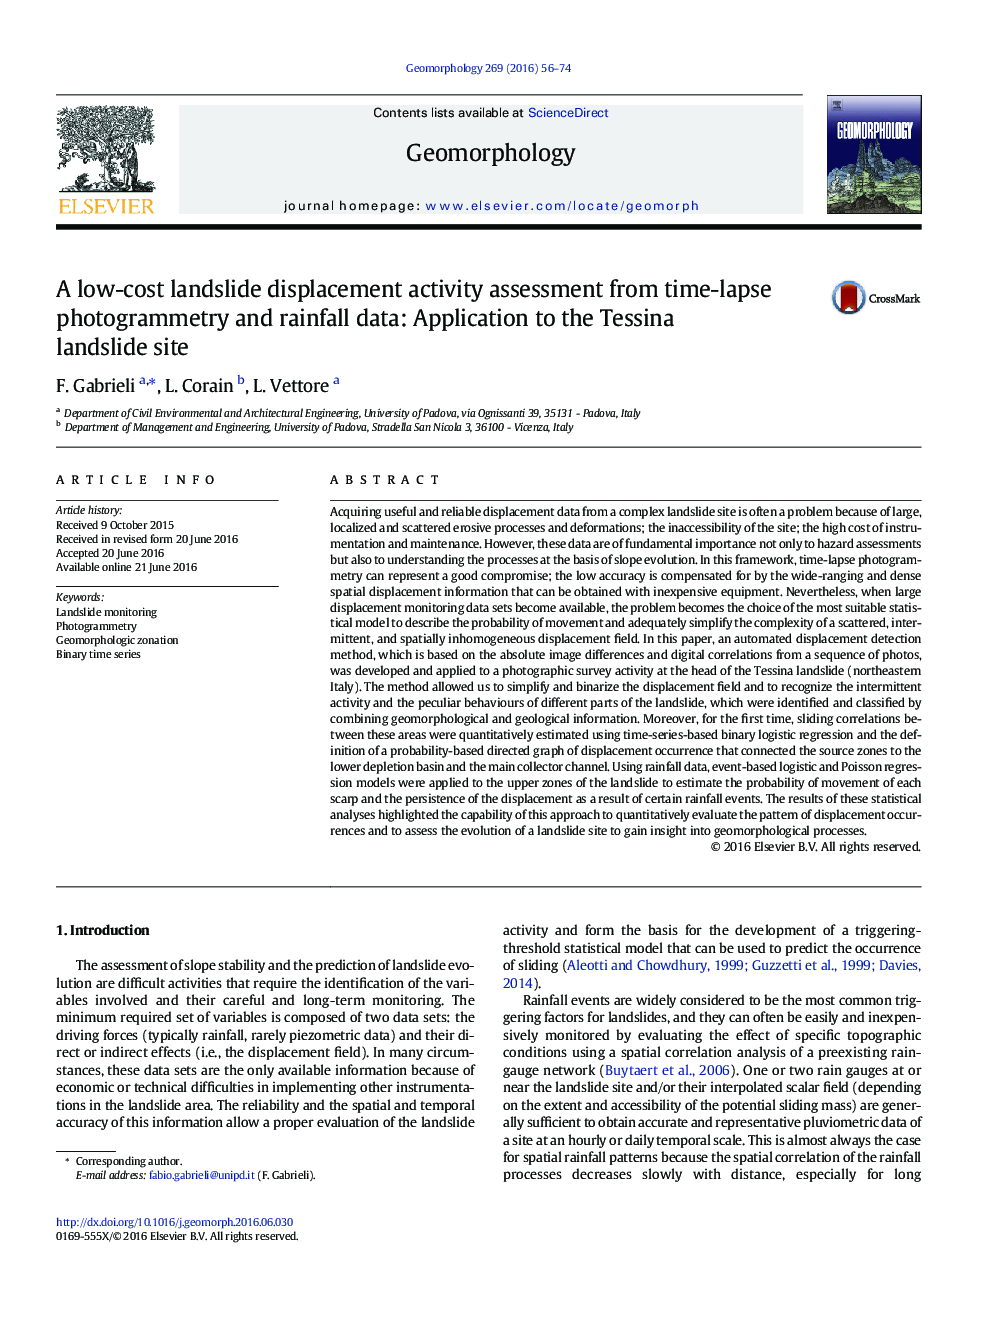 A low-cost landslide displacement activity assessment from time-lapse photogrammetry and rainfall data: Application to the Tessina landslide site